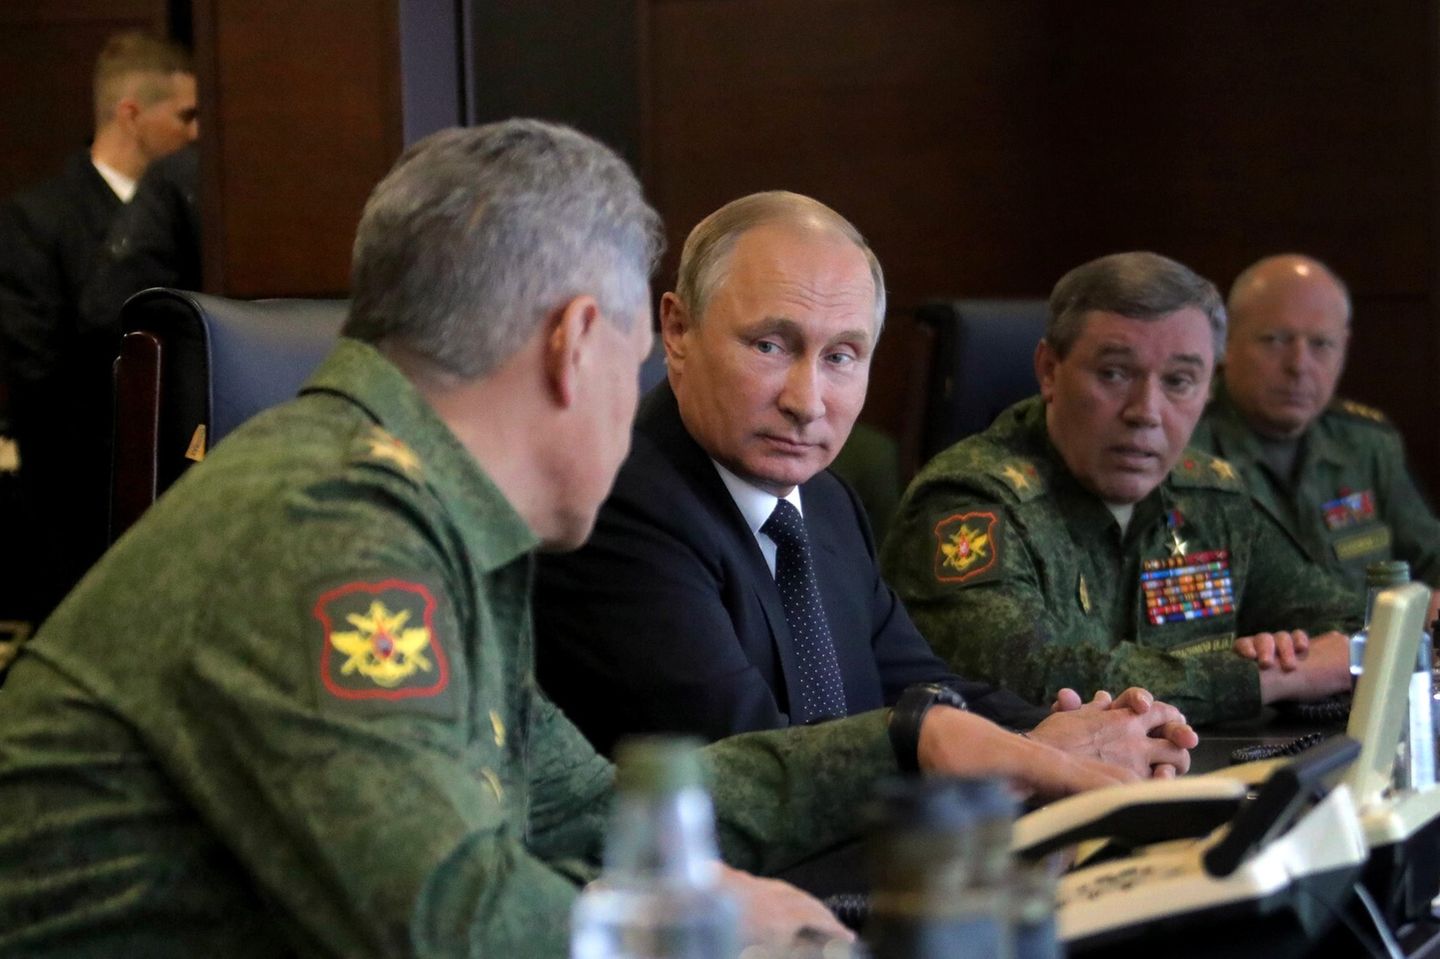 September 18, 2017 - Leningrad Region, Russia - September 18, 2017. - Russia, Leningrad Region, Luzhsky range. - Russian President Vladimir Putin seen while surveying the Russia and Belarus Union State armed forces activities at the main stage of the joint strategic exercises 'Zapad-2017'. Second right: Deputy Defense Minister General Valery Gerasimov, Chief of the Russian Armed Forces General Staff. Left: Russian Defense Minister Sergey Shoigu